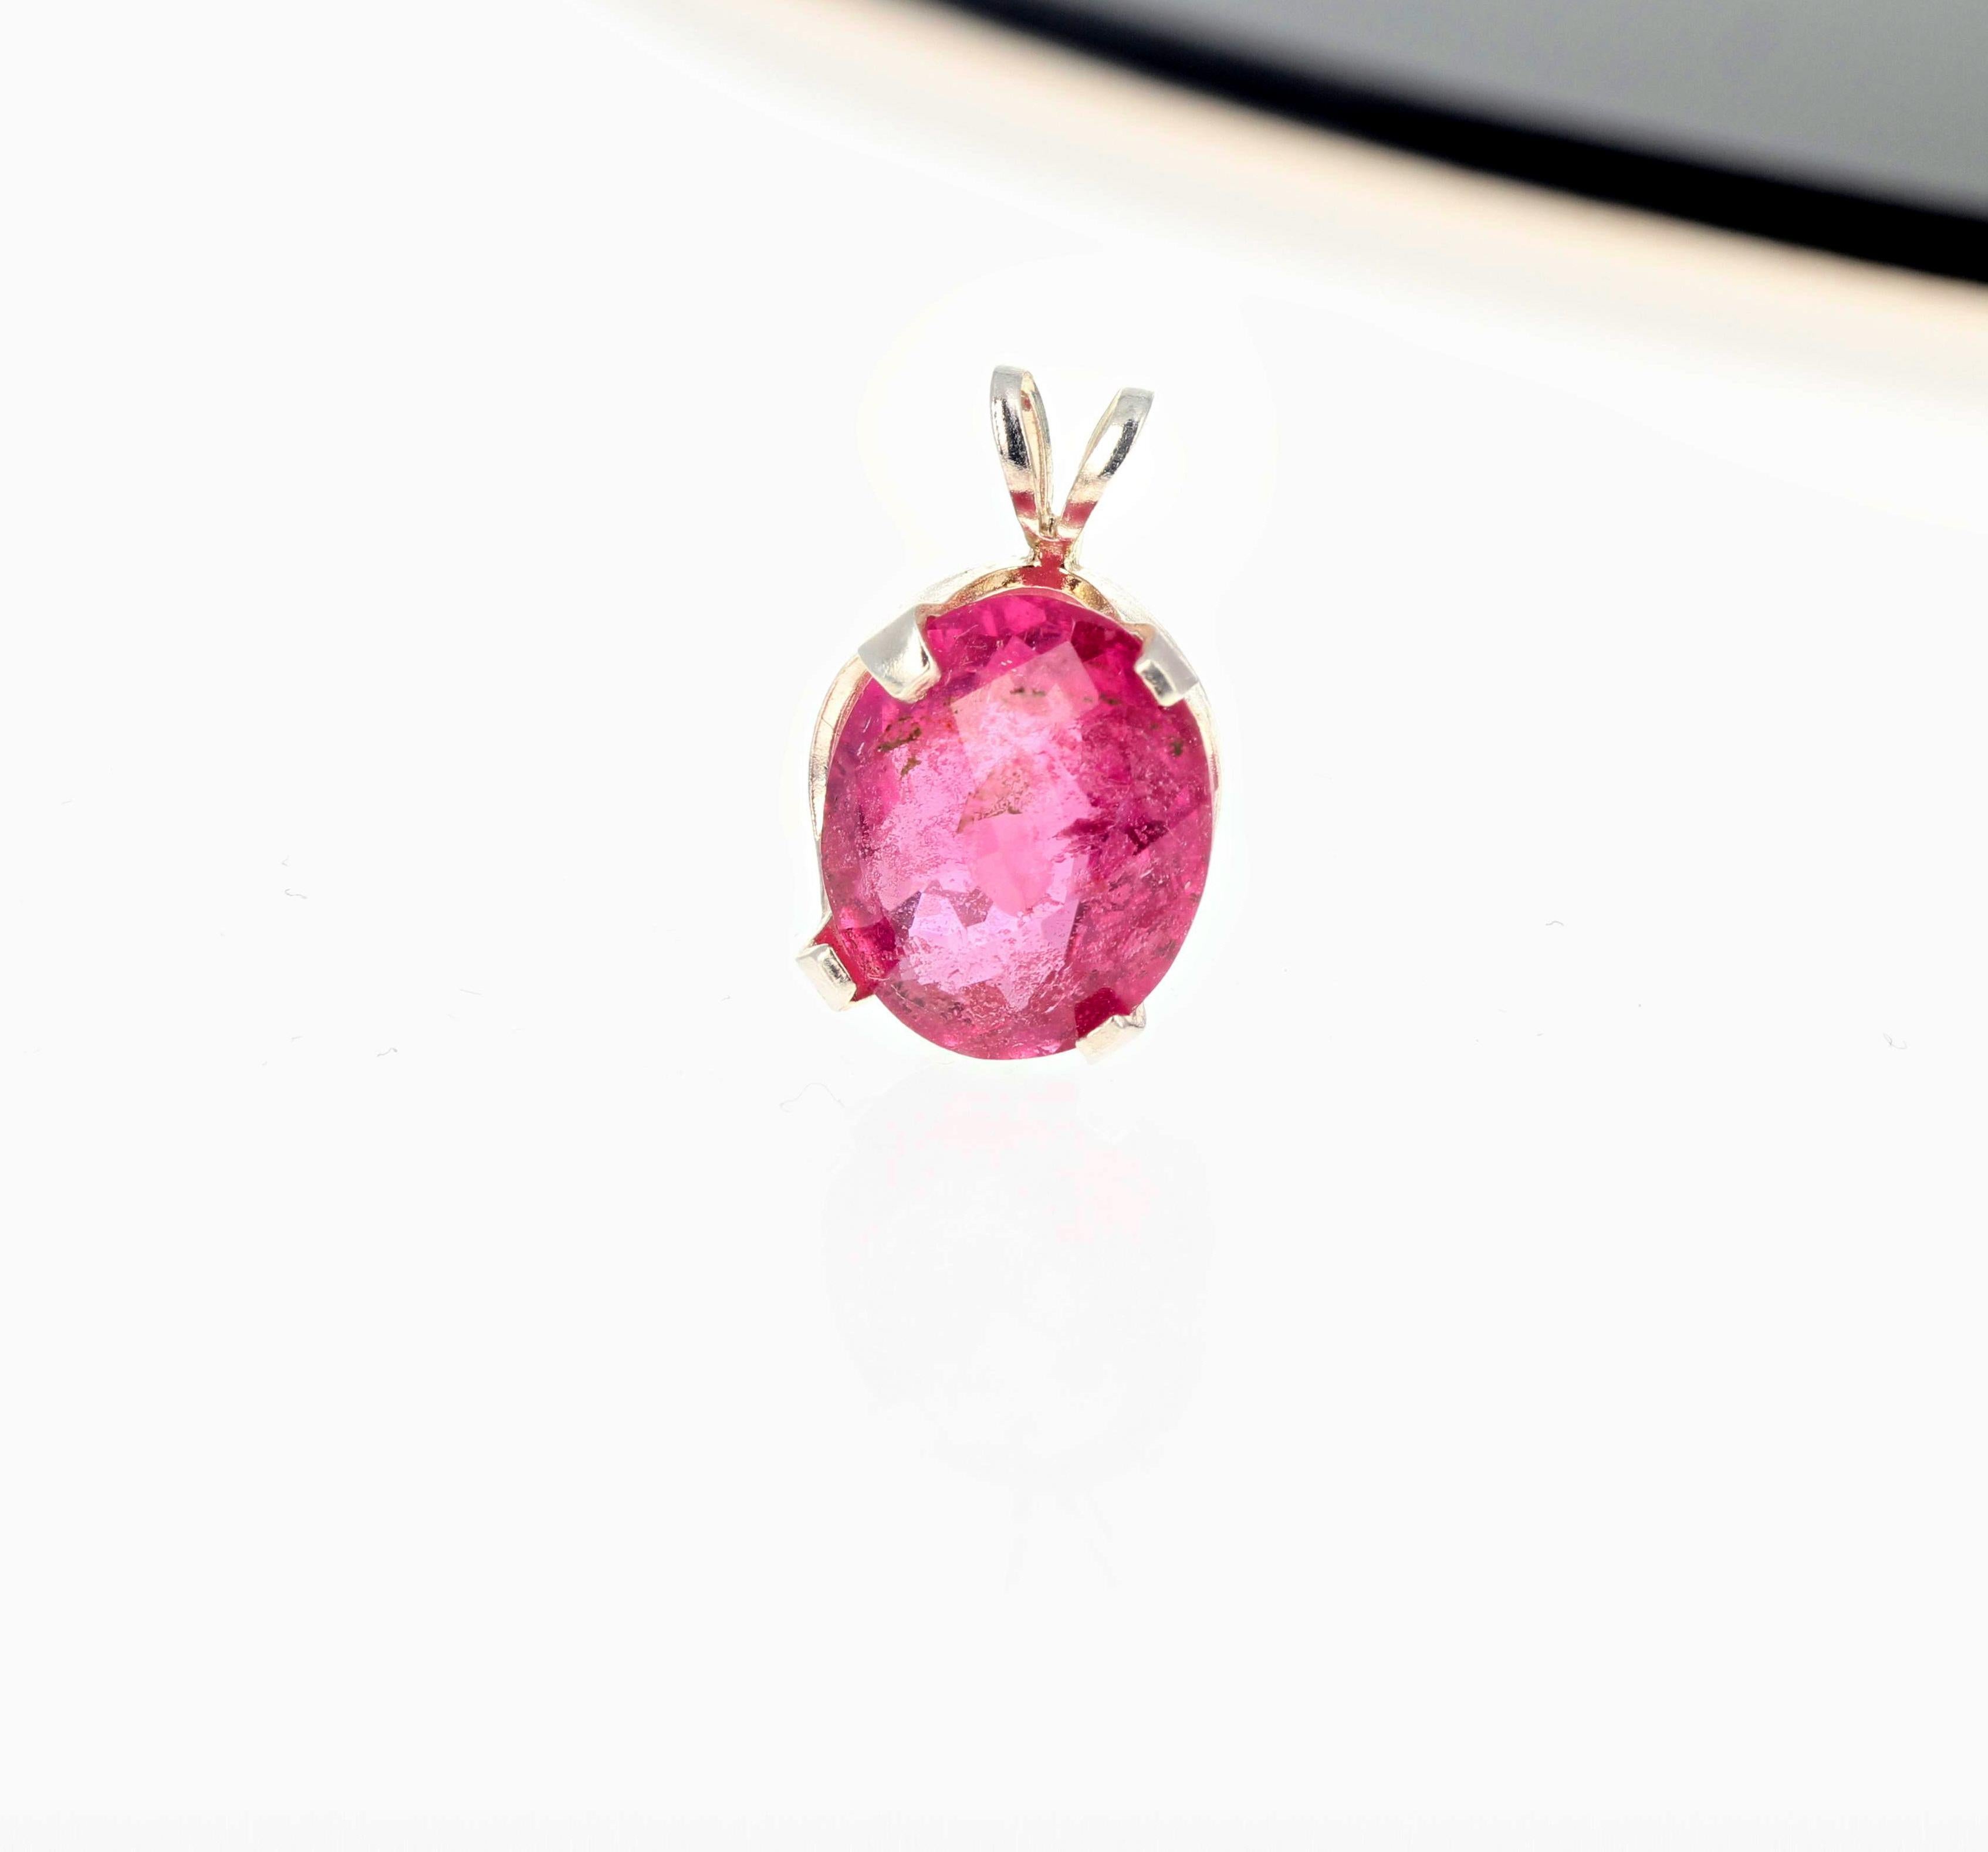 This glowing 4 Carat natural glittery pink Brasilian Tourmaline (gemstone is11 mm x 9 mm) is set in a Sterling Silver pendant.  The gemstone is oval with checkerboard cut to sparkle more. 